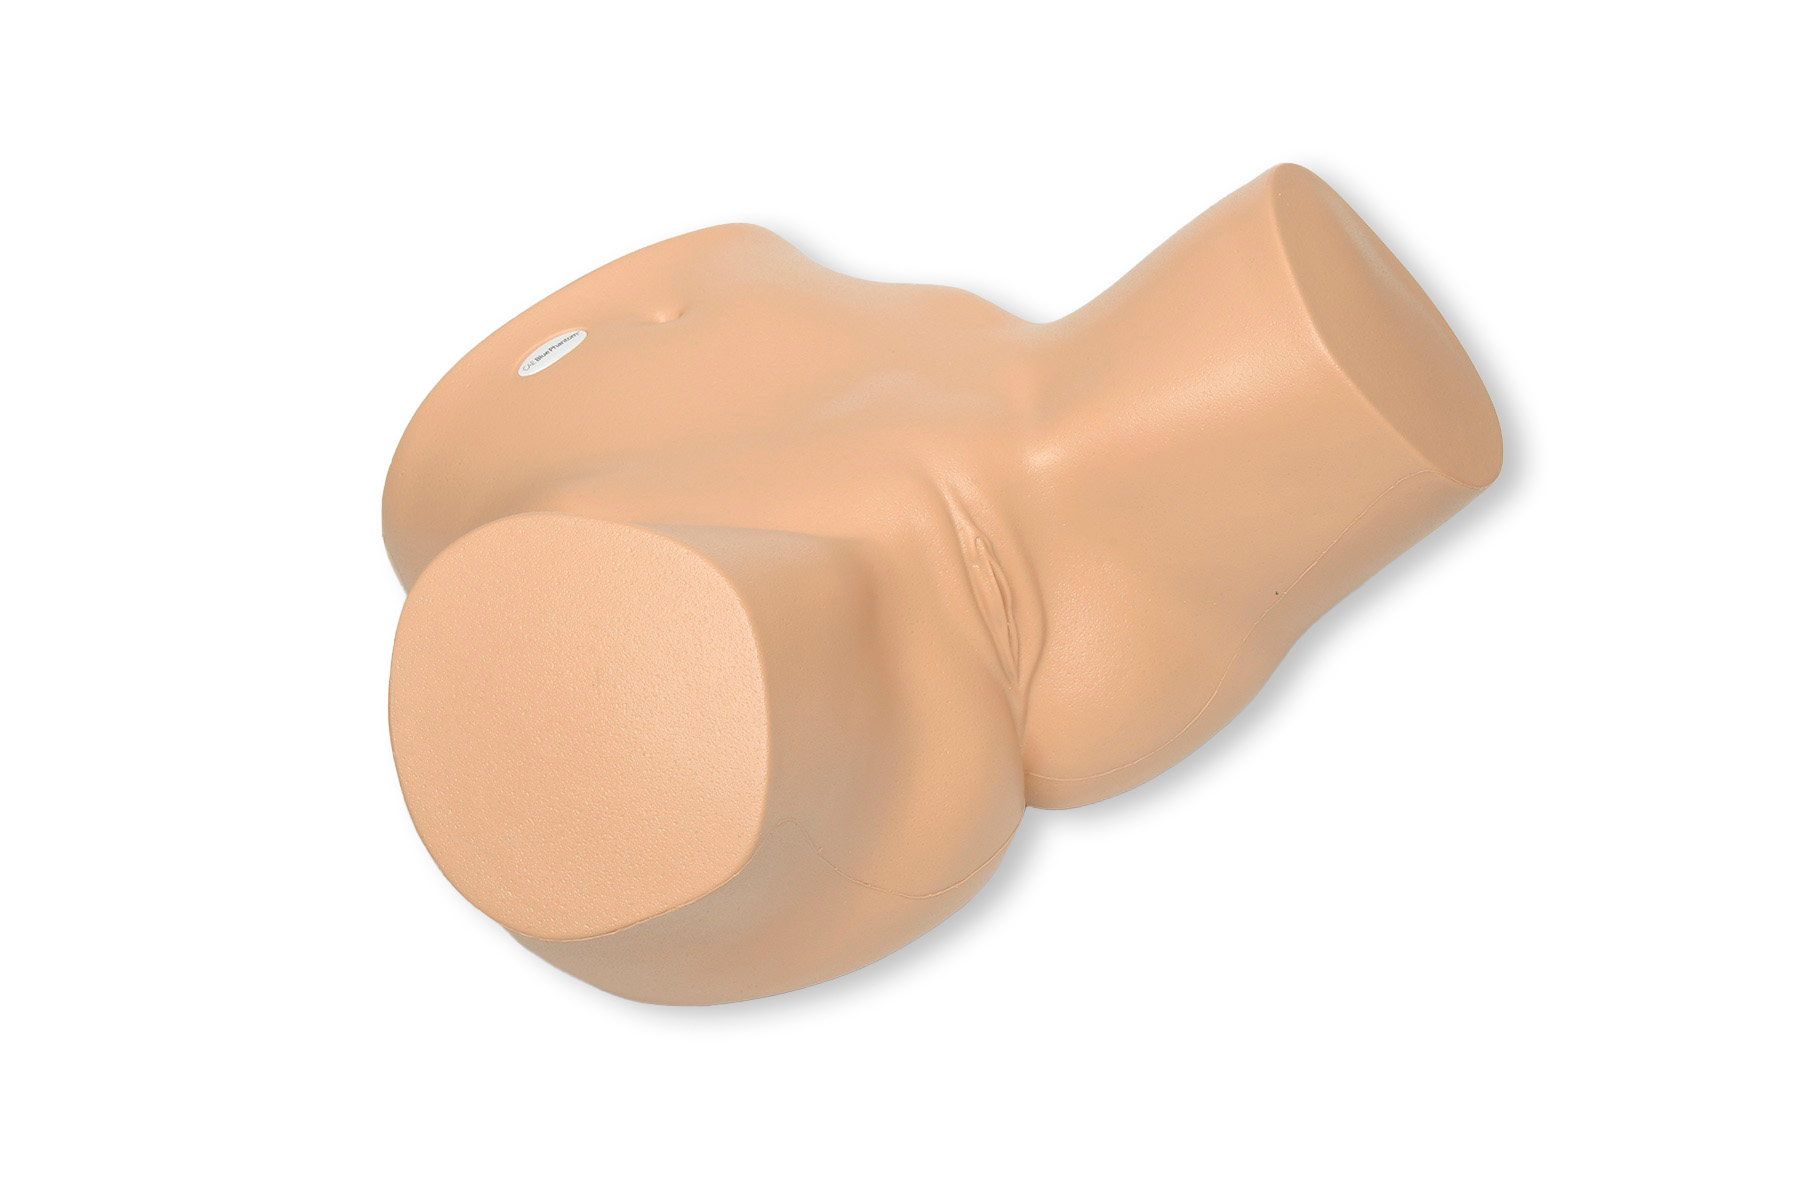 Combination Iup Ectopic Pregnancy Transvaginal Ultrasound Training Model